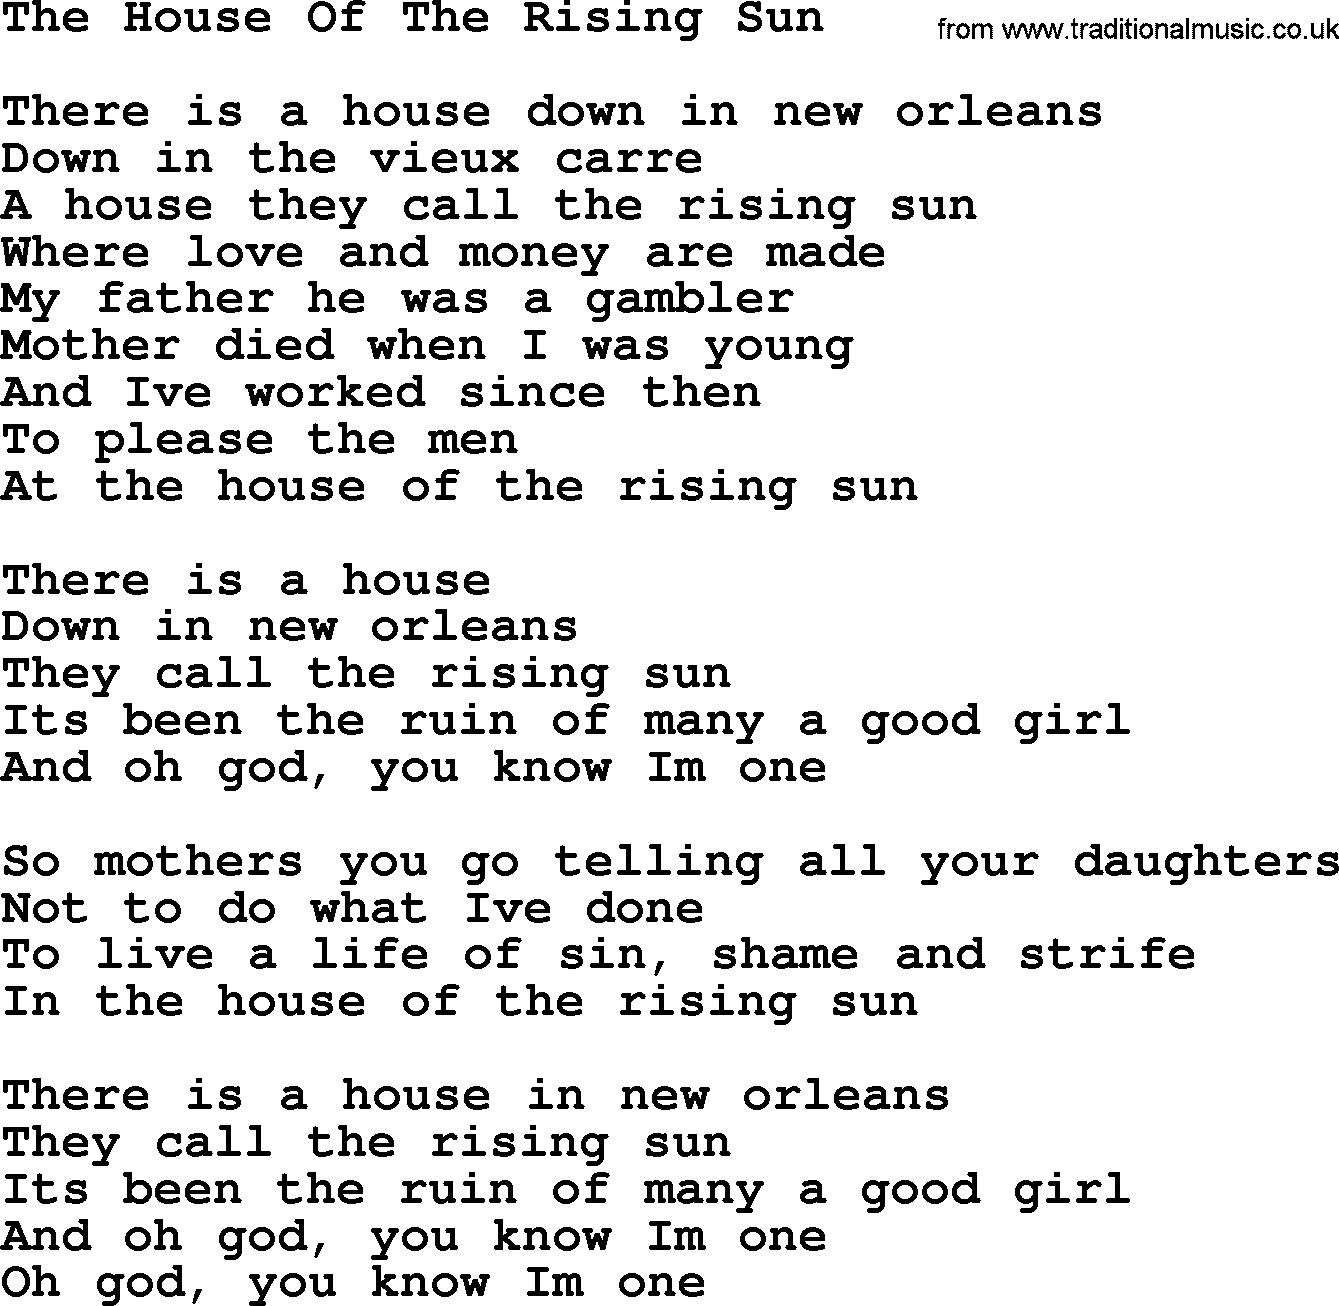 House Of The Rising Sun Chords Dolly Parton Song The House Of The Rising Sun Lyrics